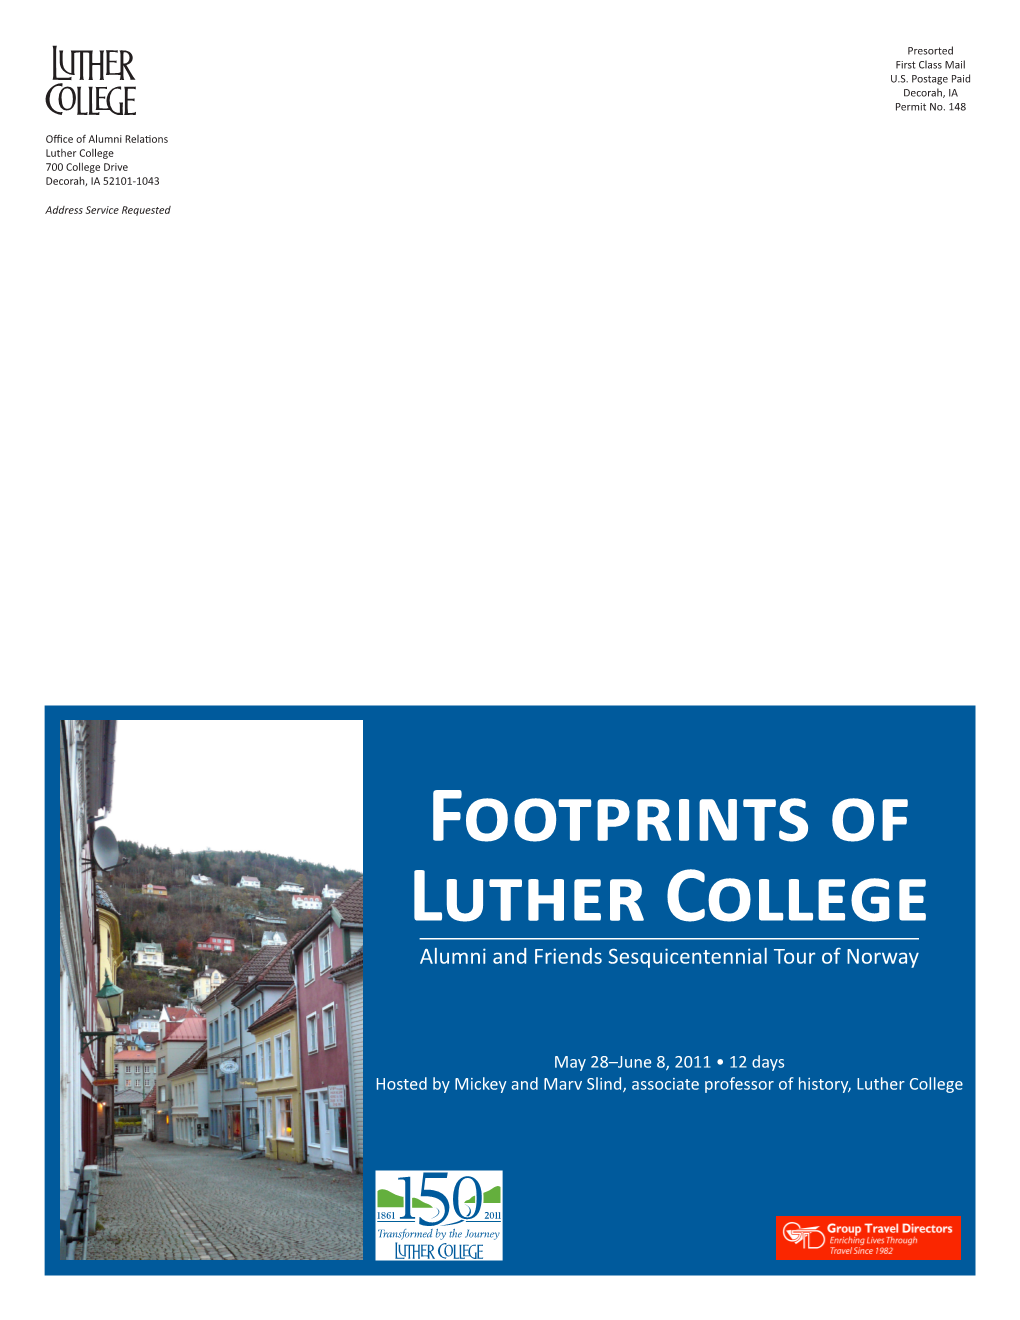 Footprints of Luther College Alumni and Friends Sesquicentennial Tour of Norway